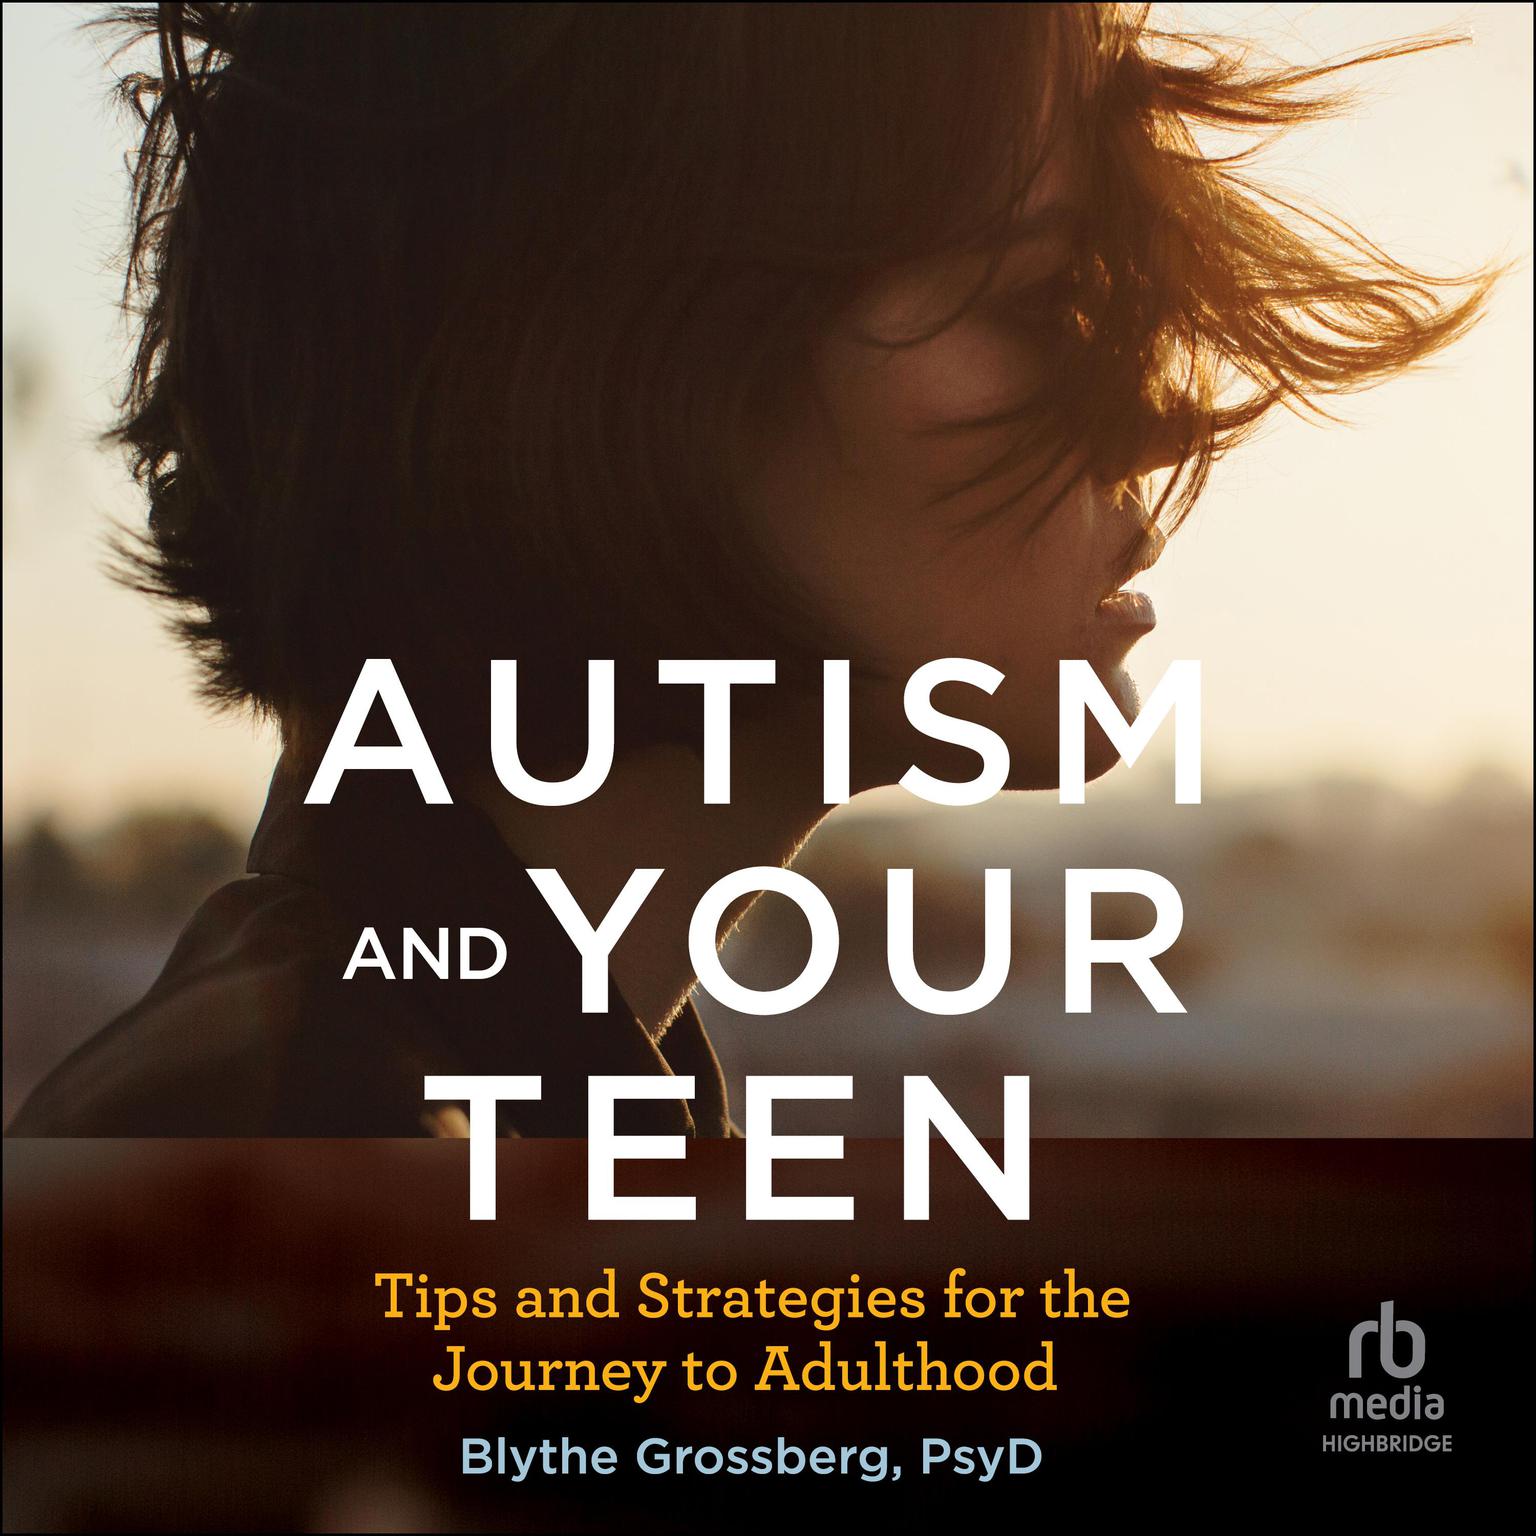 Autism and Your Teen: Tips and Strategies for the Journey to Adulthood Audiobook, by Blythe Grossberg